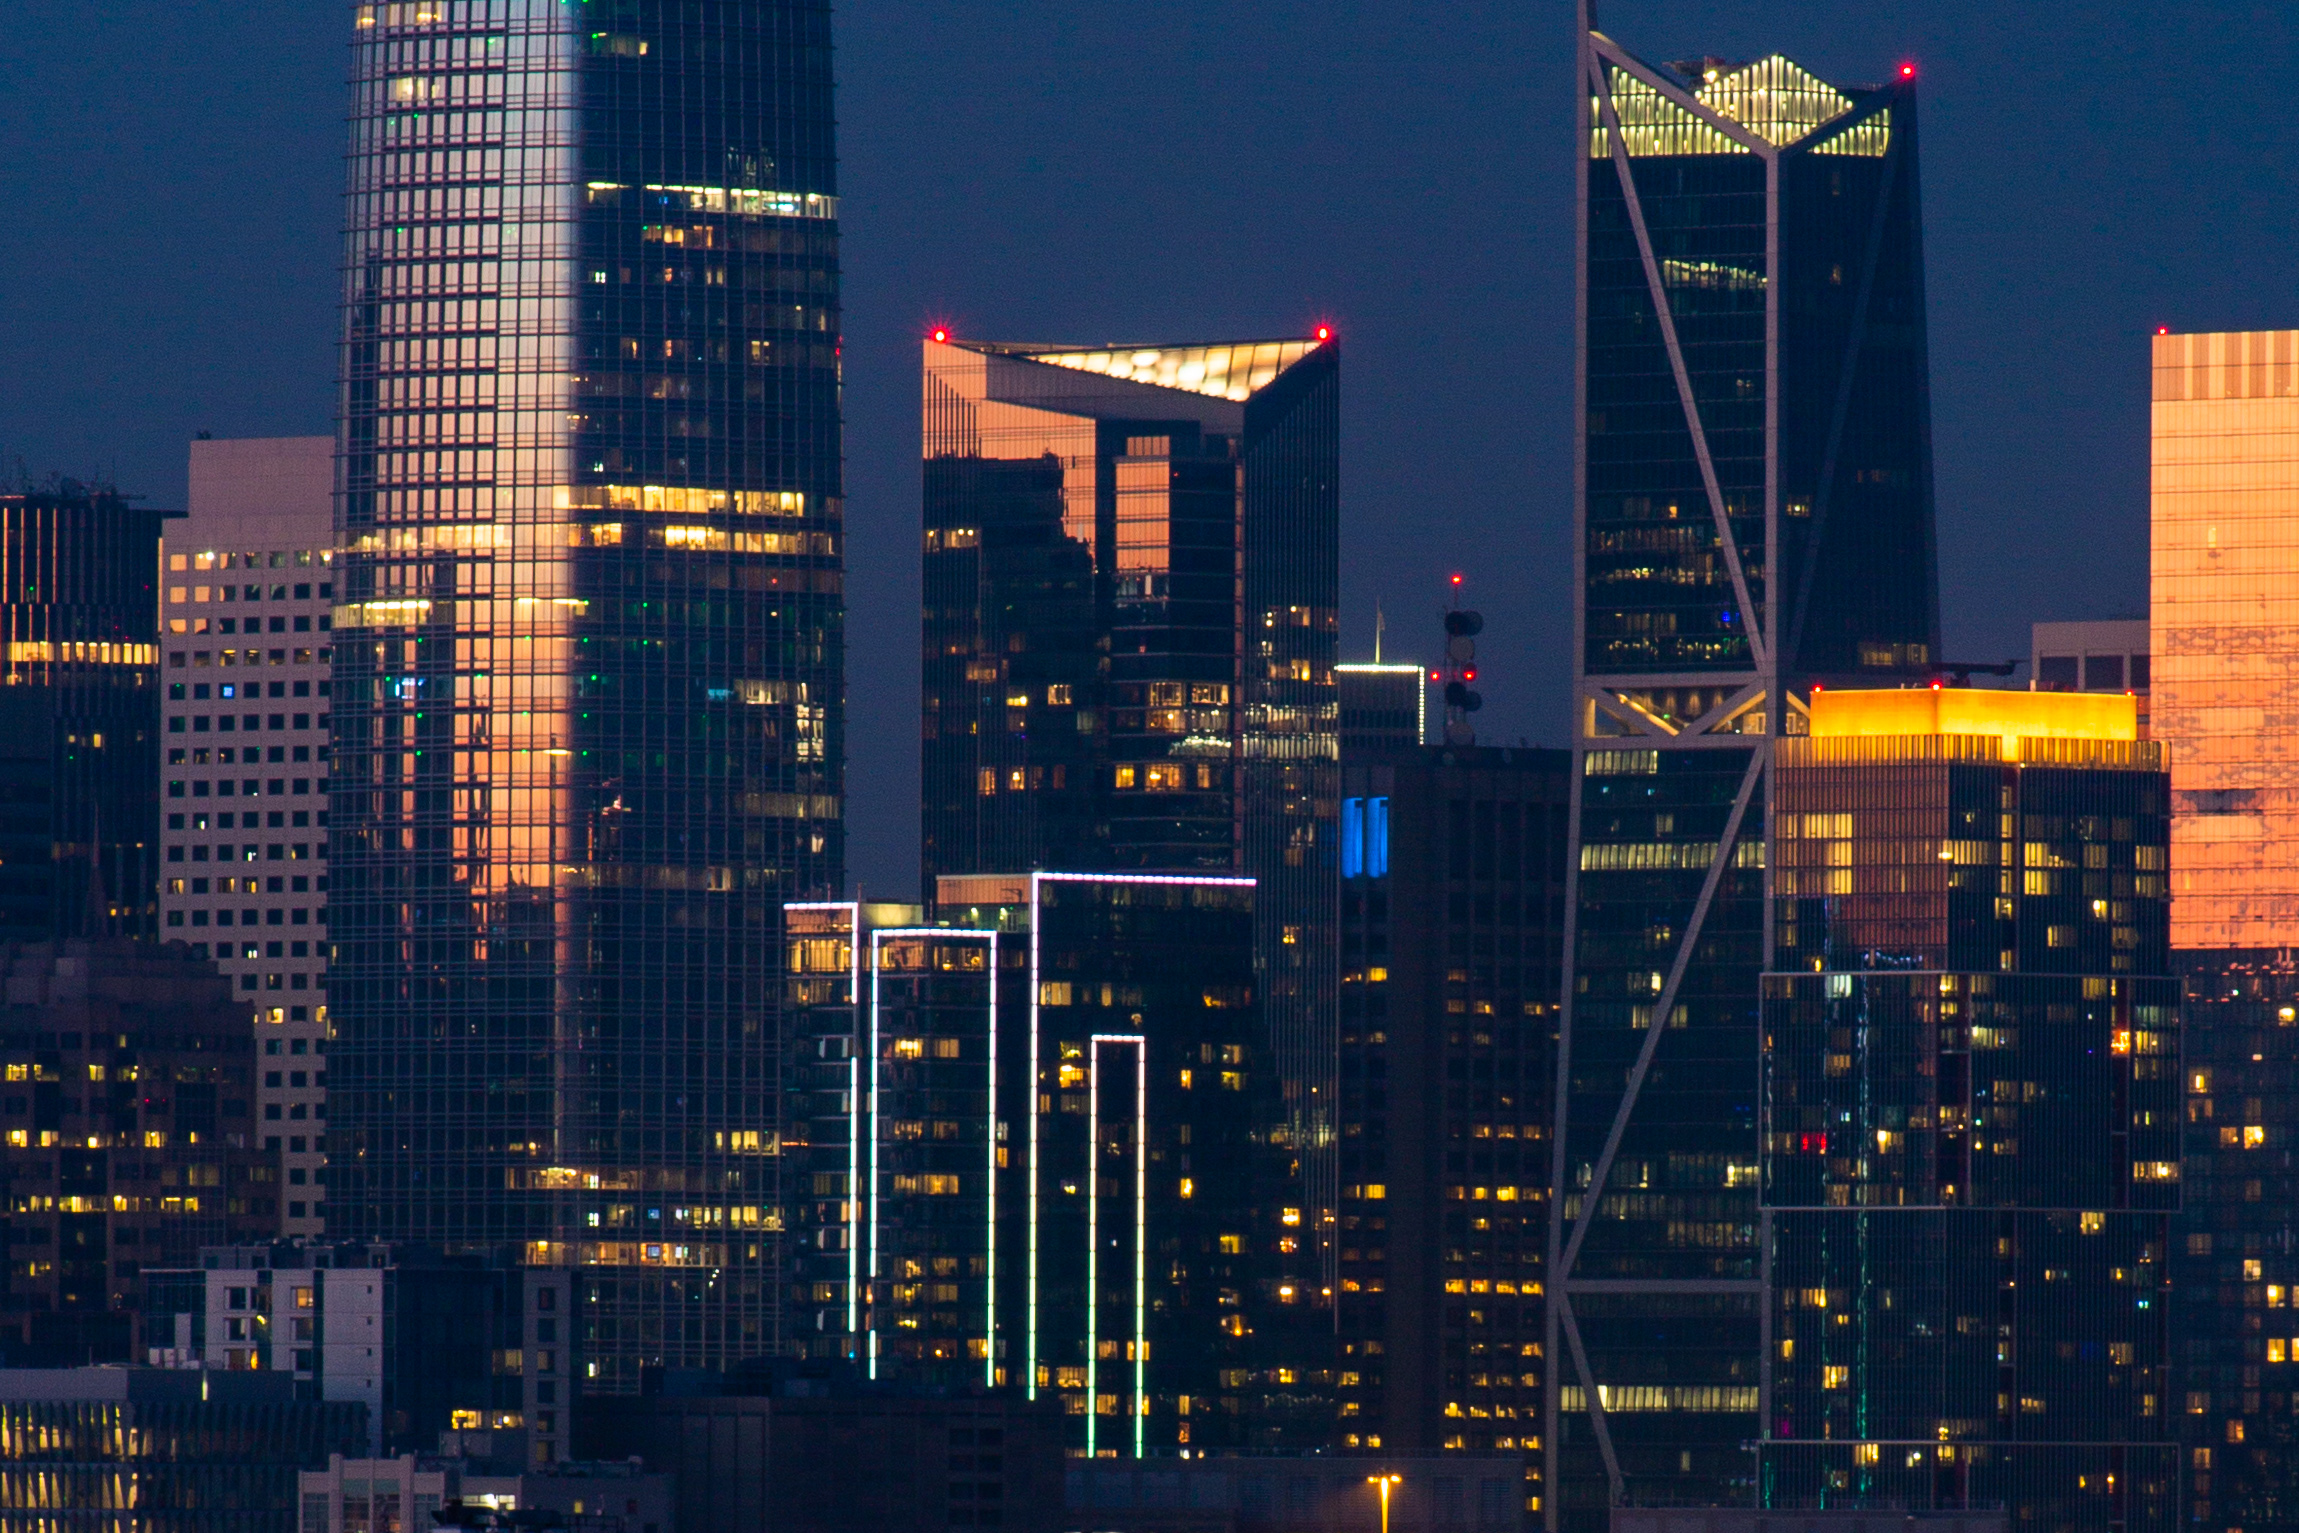 Millennium Tower at sunset between the Salesforce Tower and 181 Fremont Street, image by Andrew Campbell Nelson